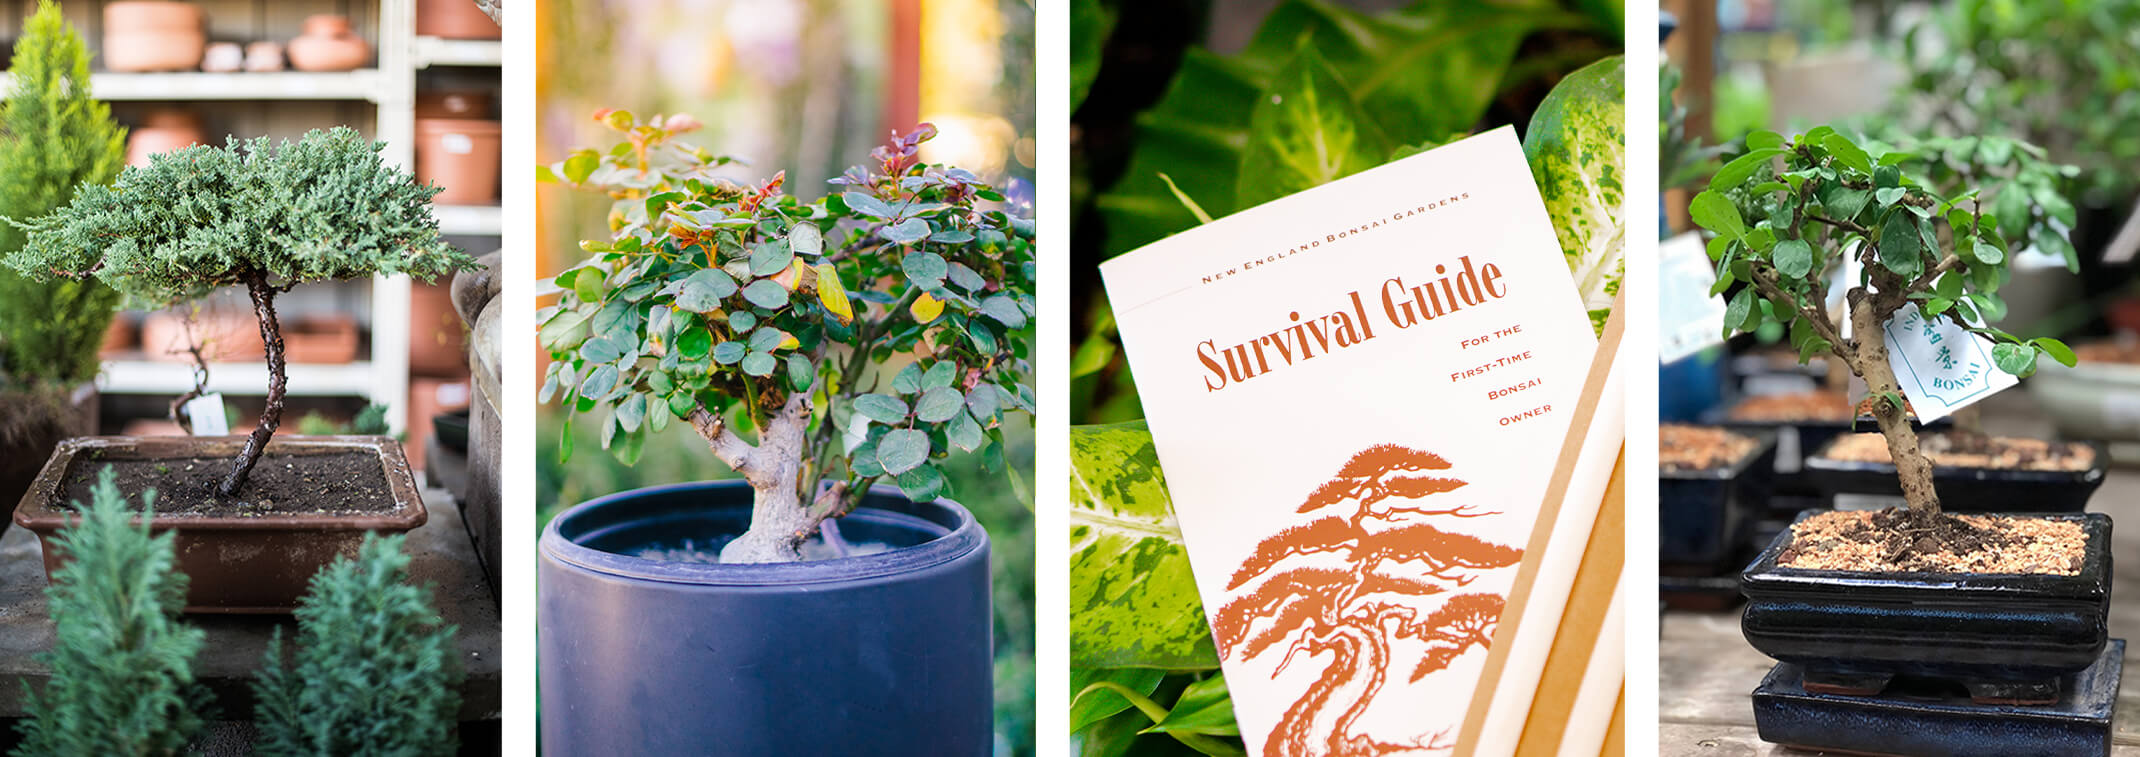 A variety of potted Bonsai trees and a Bonsai Survival Guide booklet